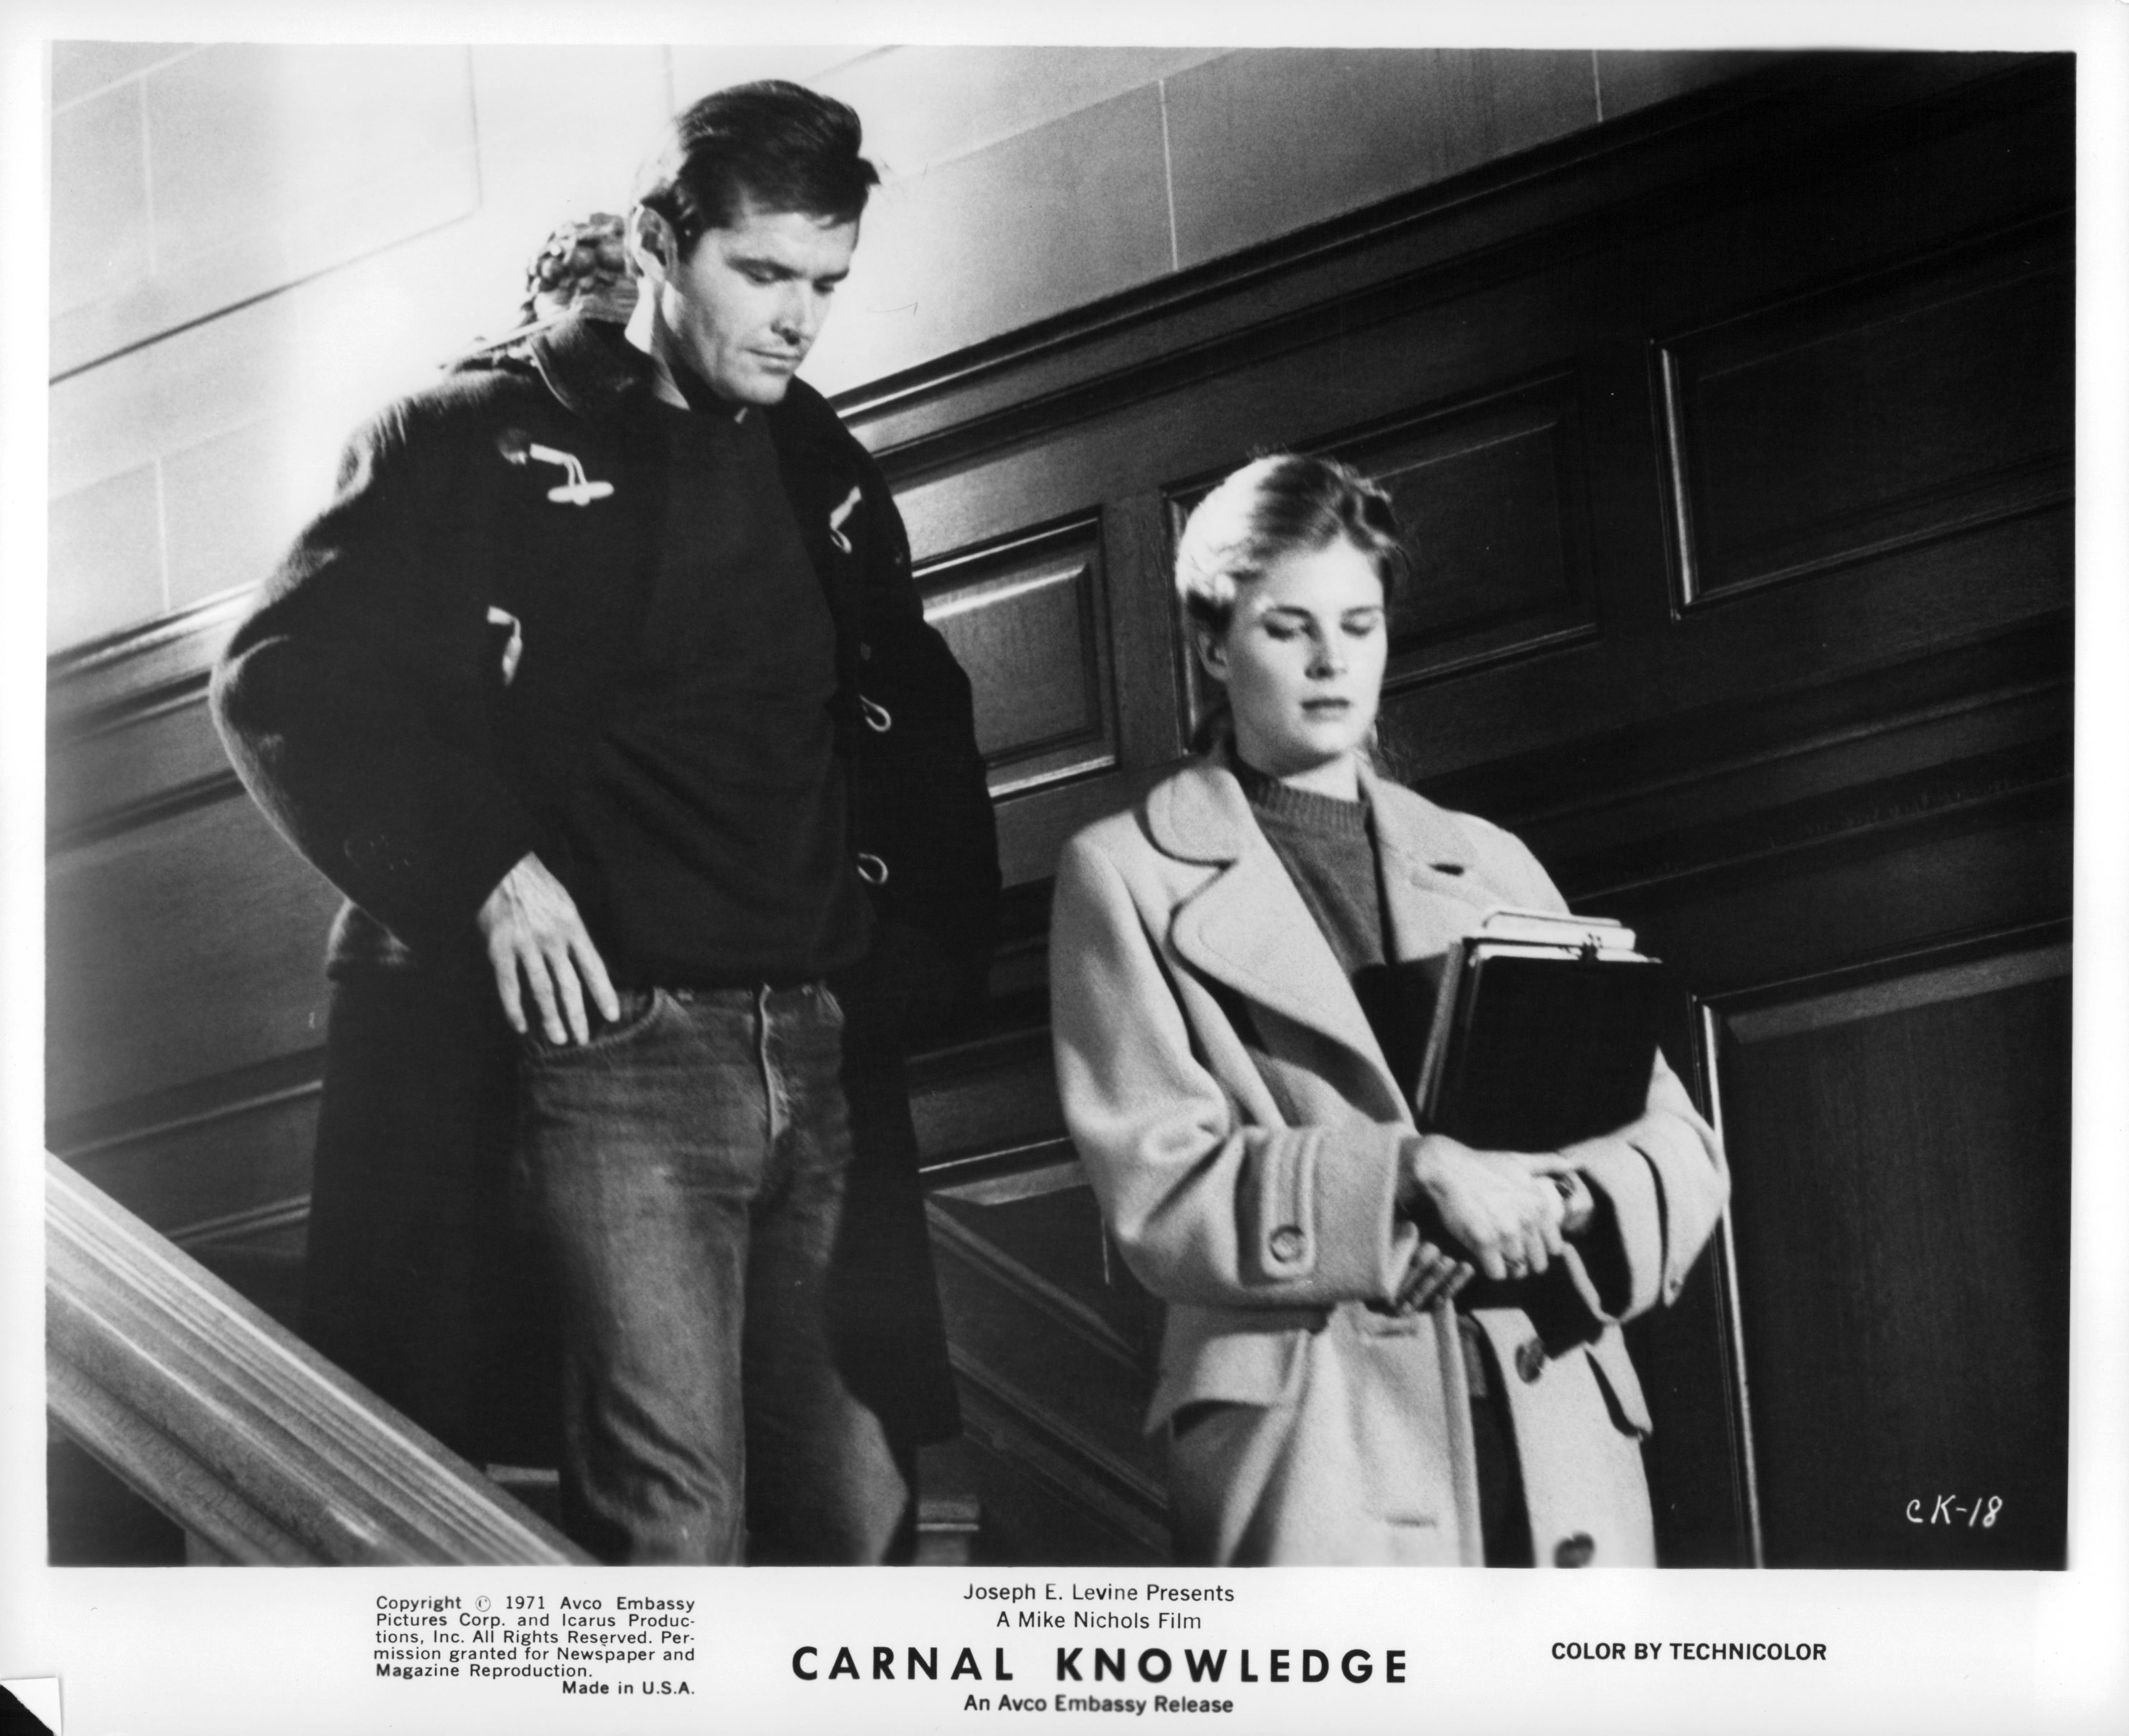 Still of Jack Nicholson and Candice Bergen in Carnal Knowledge (1971)